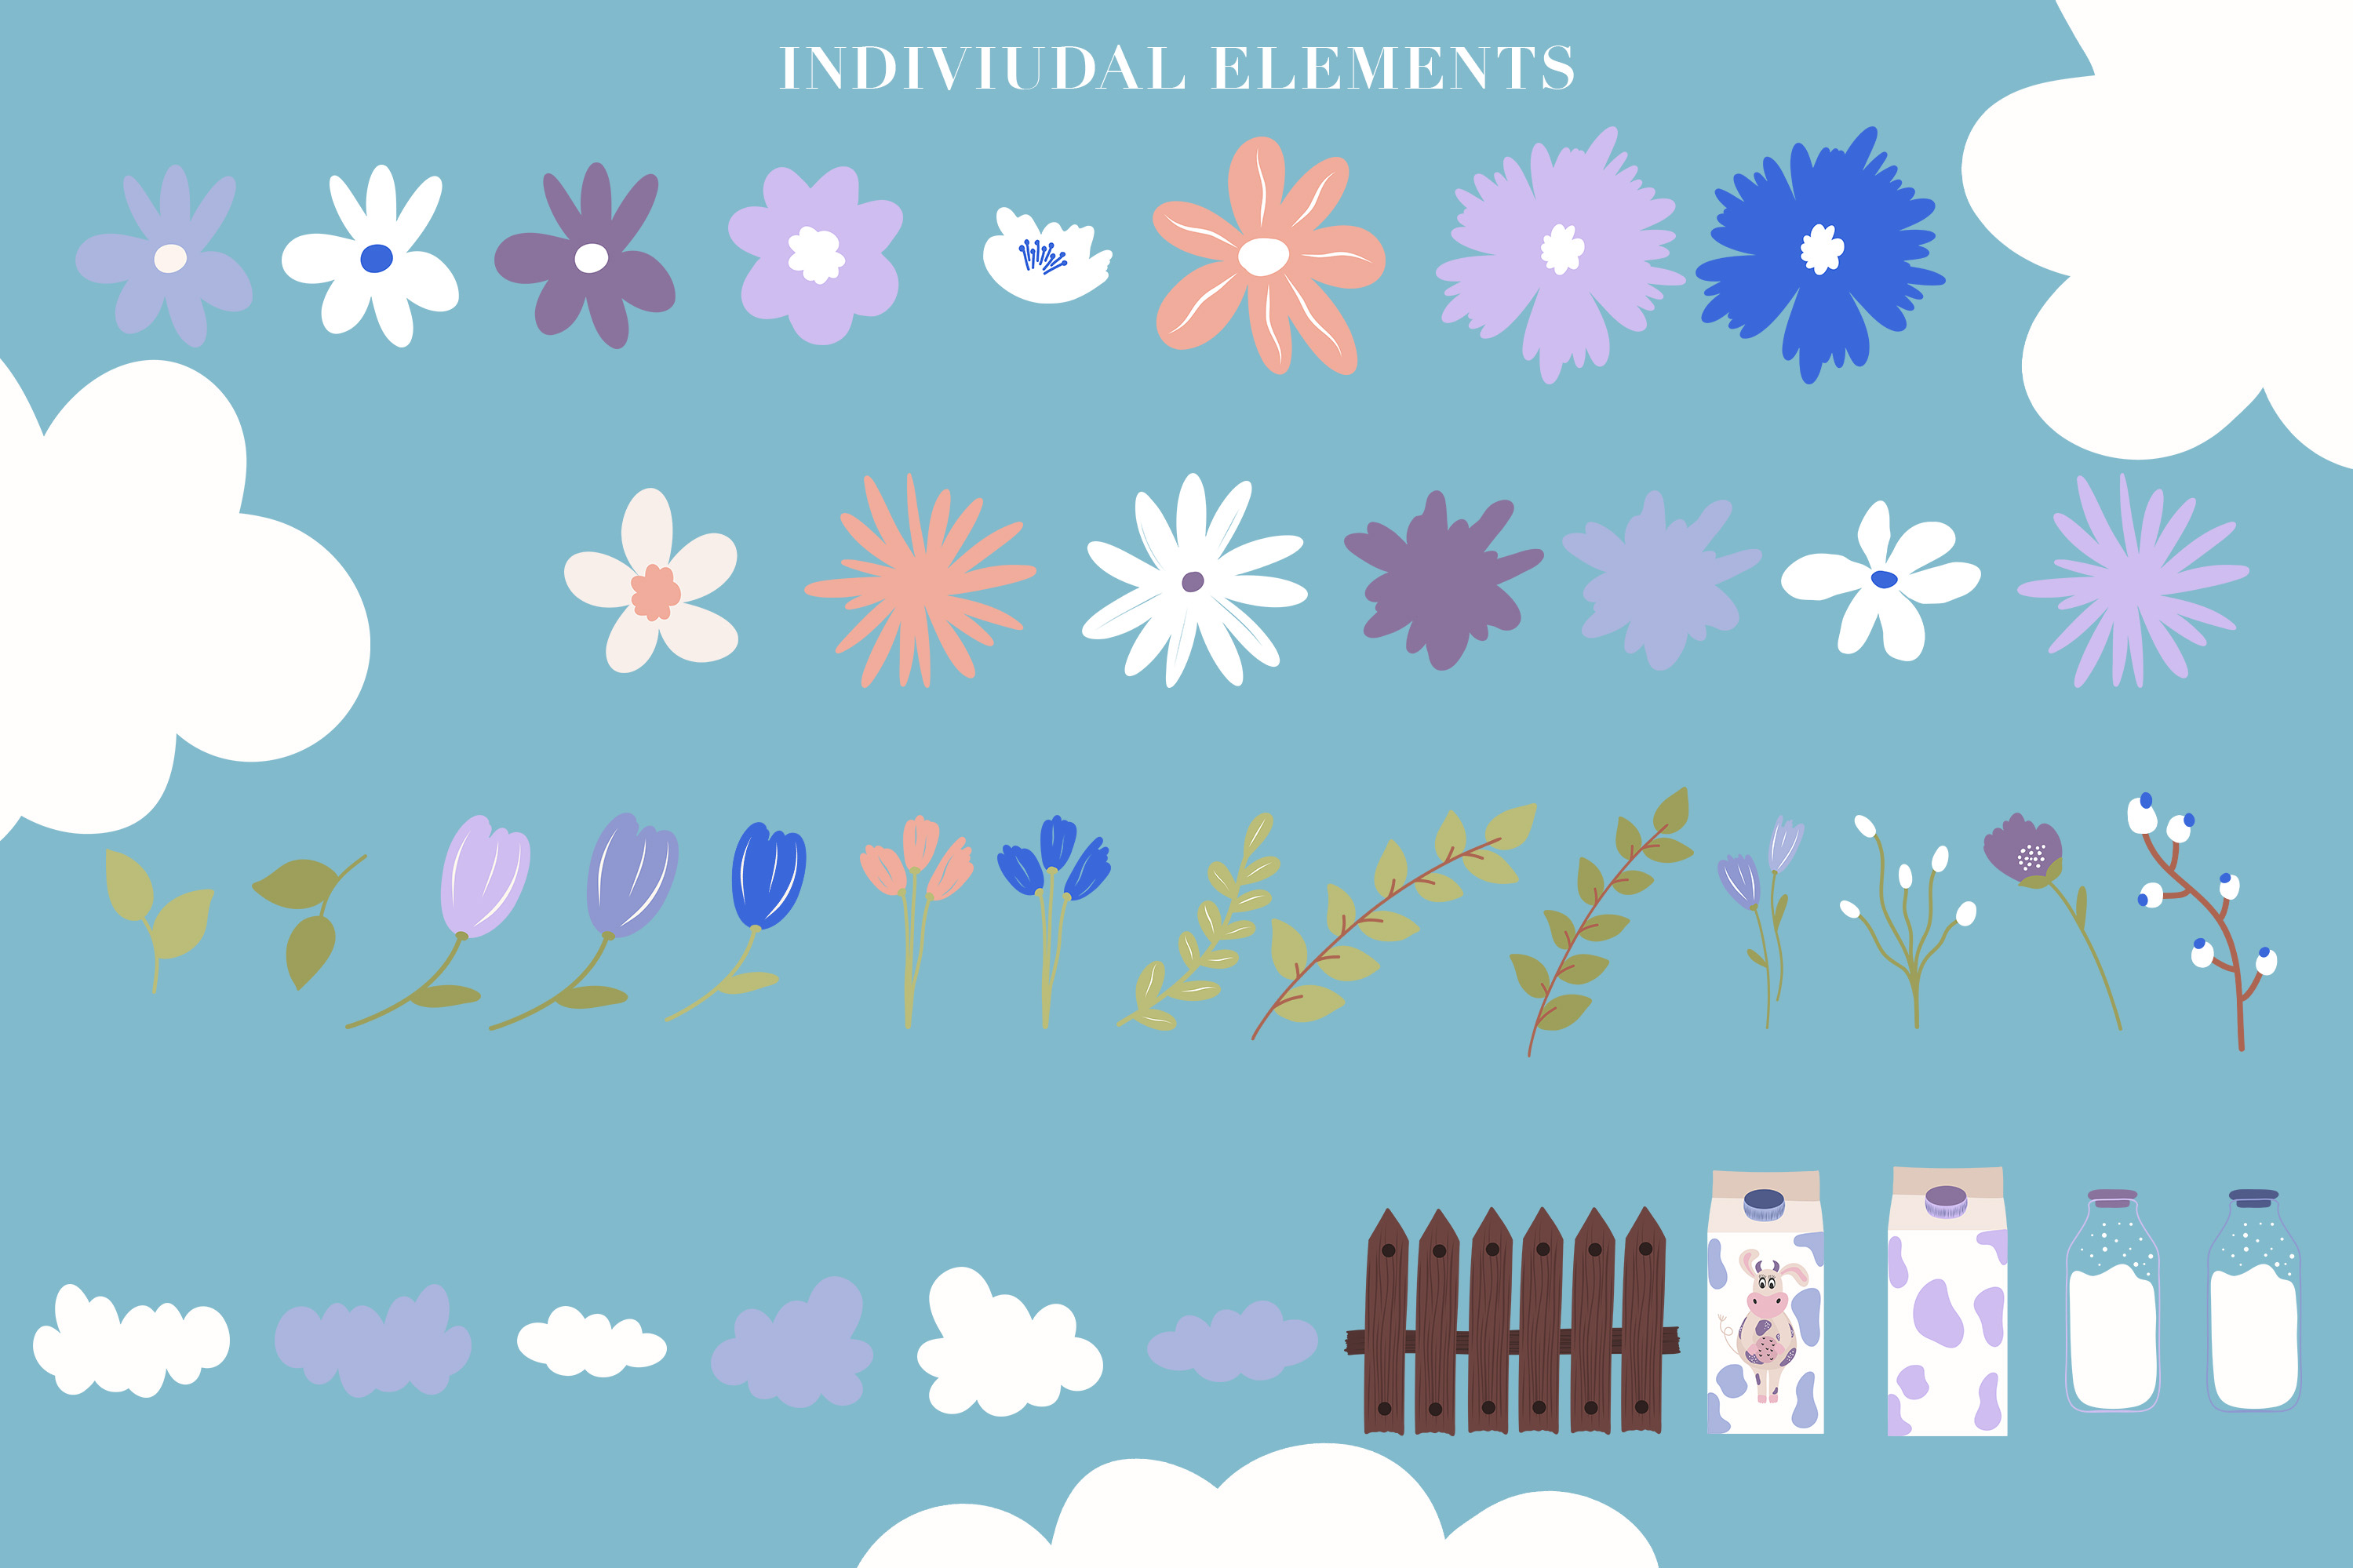 Milky Cows Cute Illustrations flower elements.